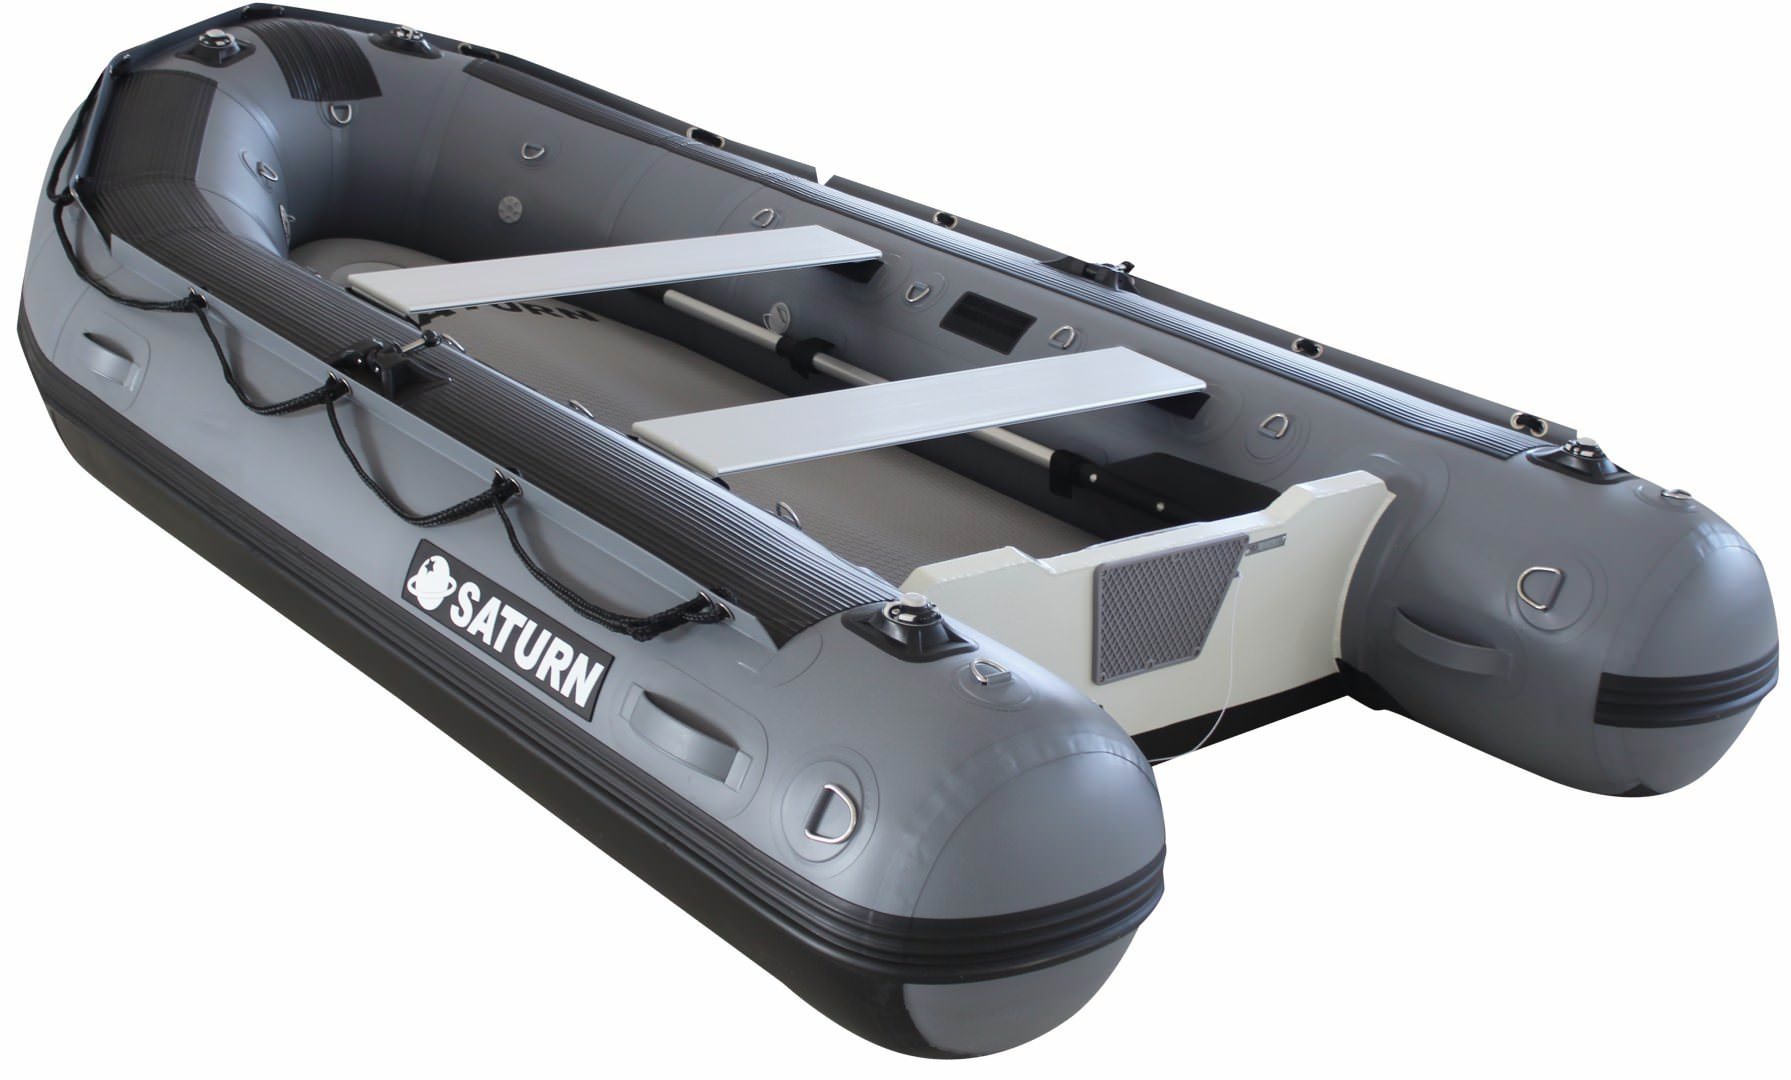 SCOUT430 Portable Inflatable Fishing Boats And Kayaks –, 40% OFF